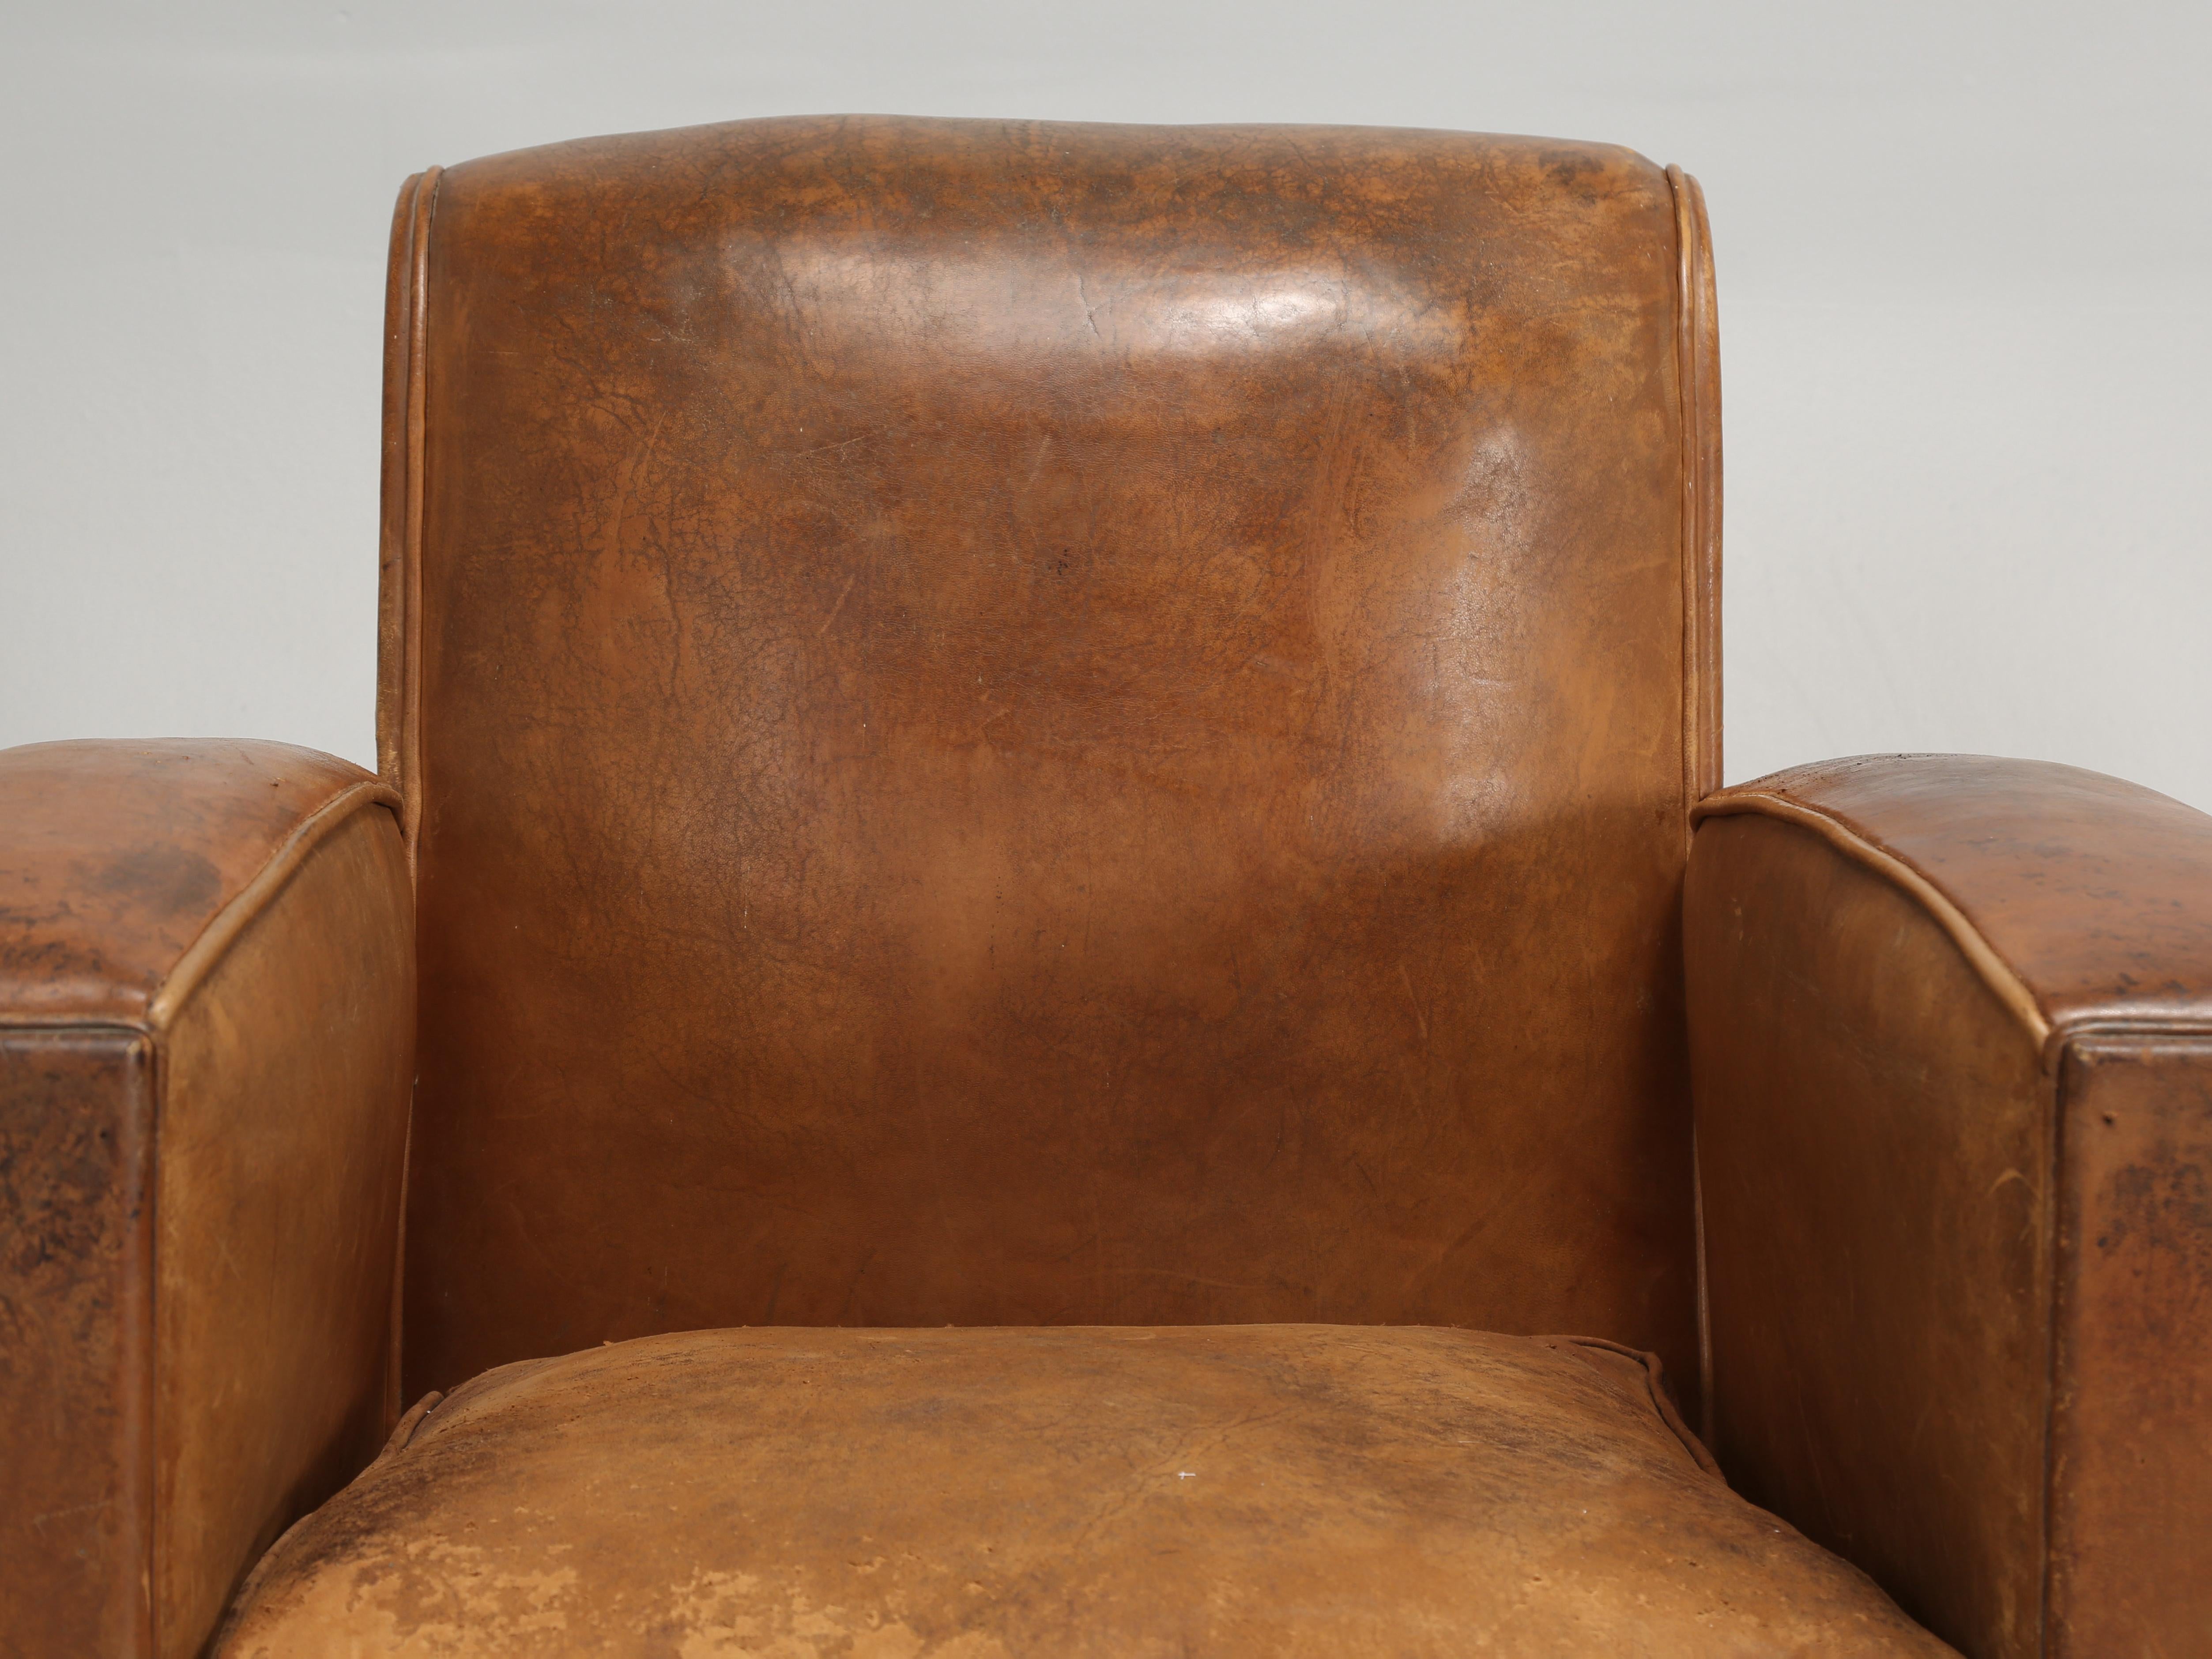 Hand-Crafted French Leather Club Chairs Unrestored Cosmetically Completely Restored Interiors